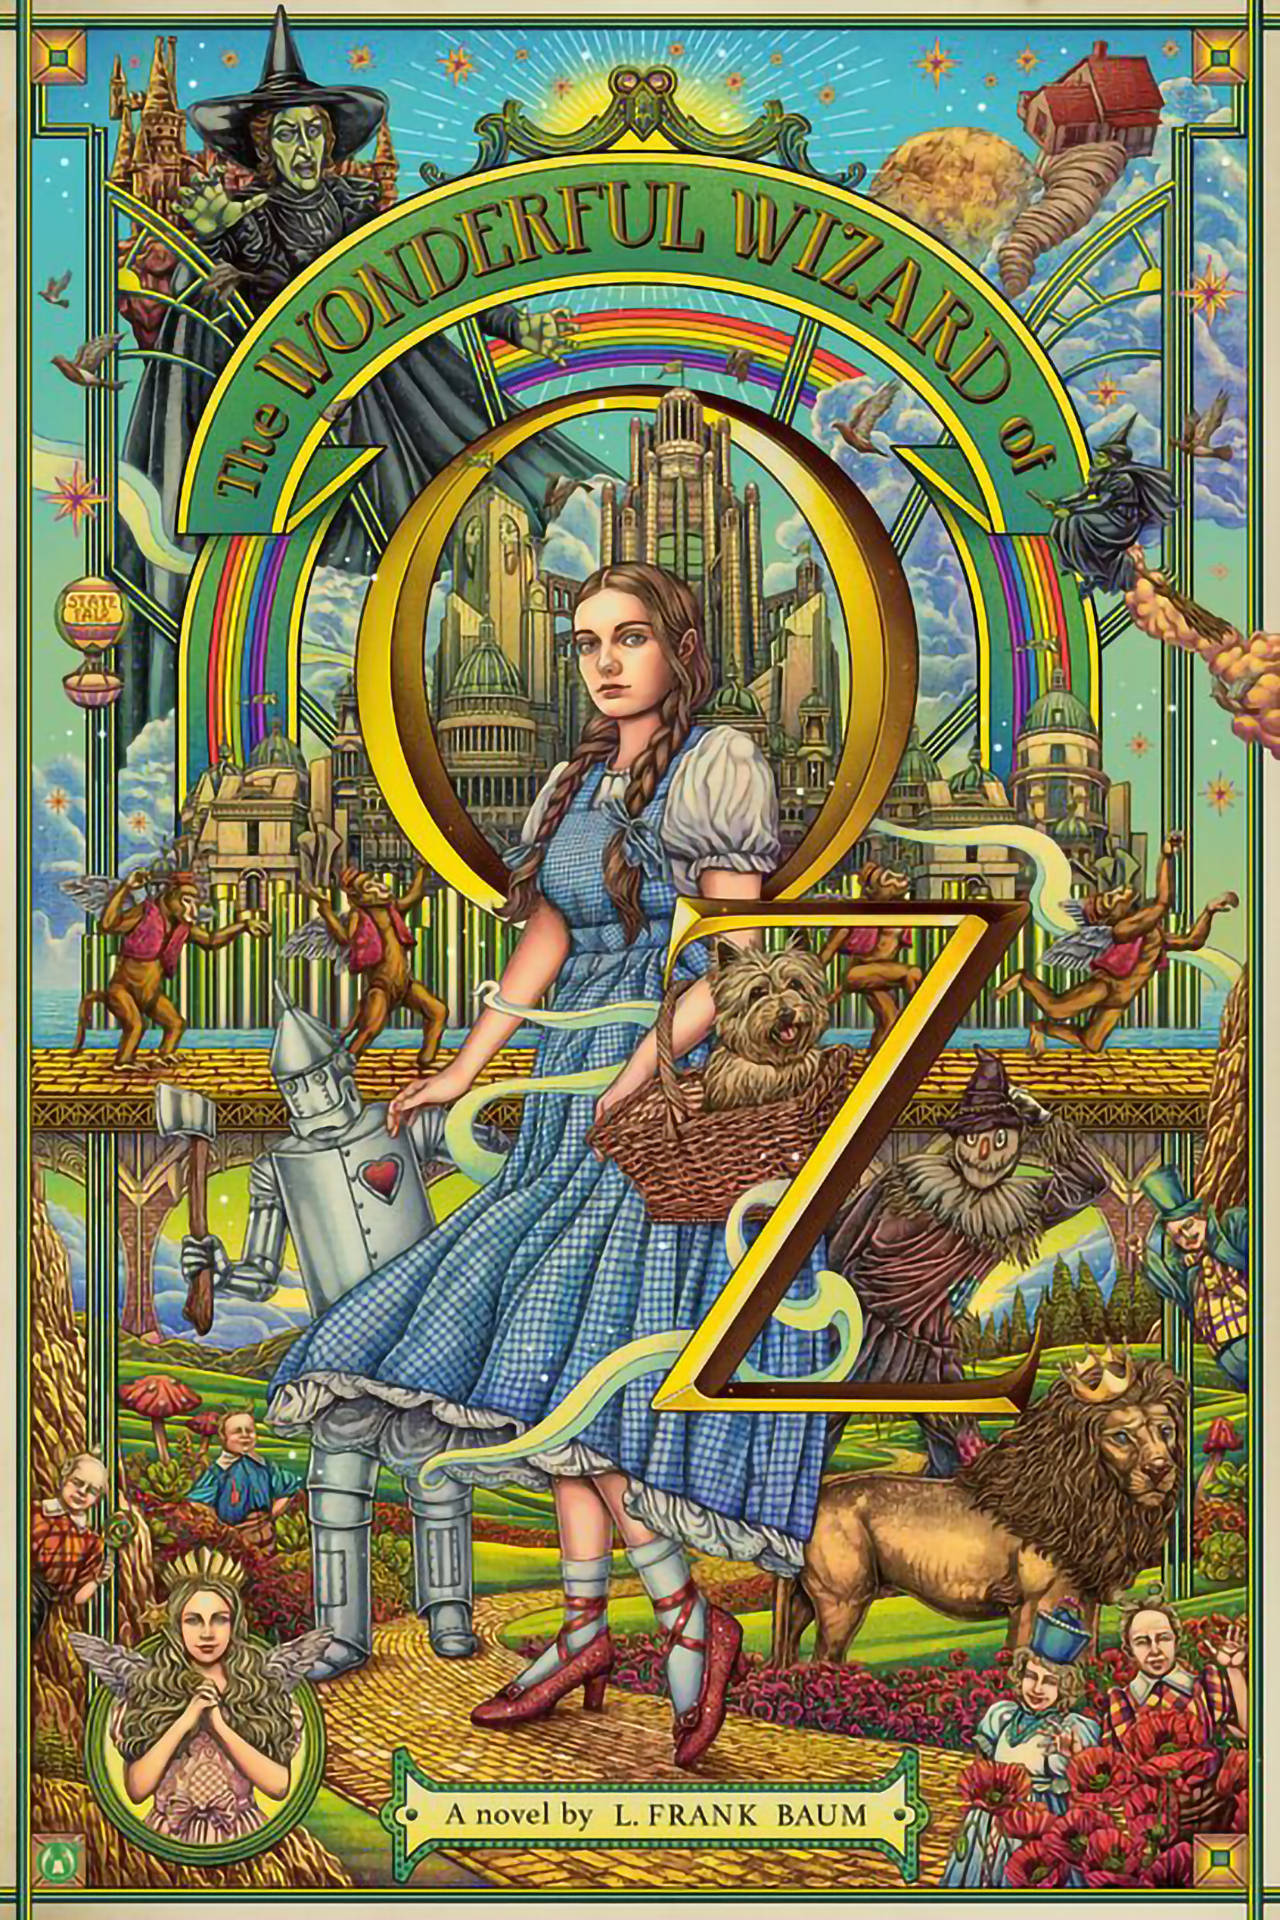 The Wizard Of Oz Fantasy Poster Background